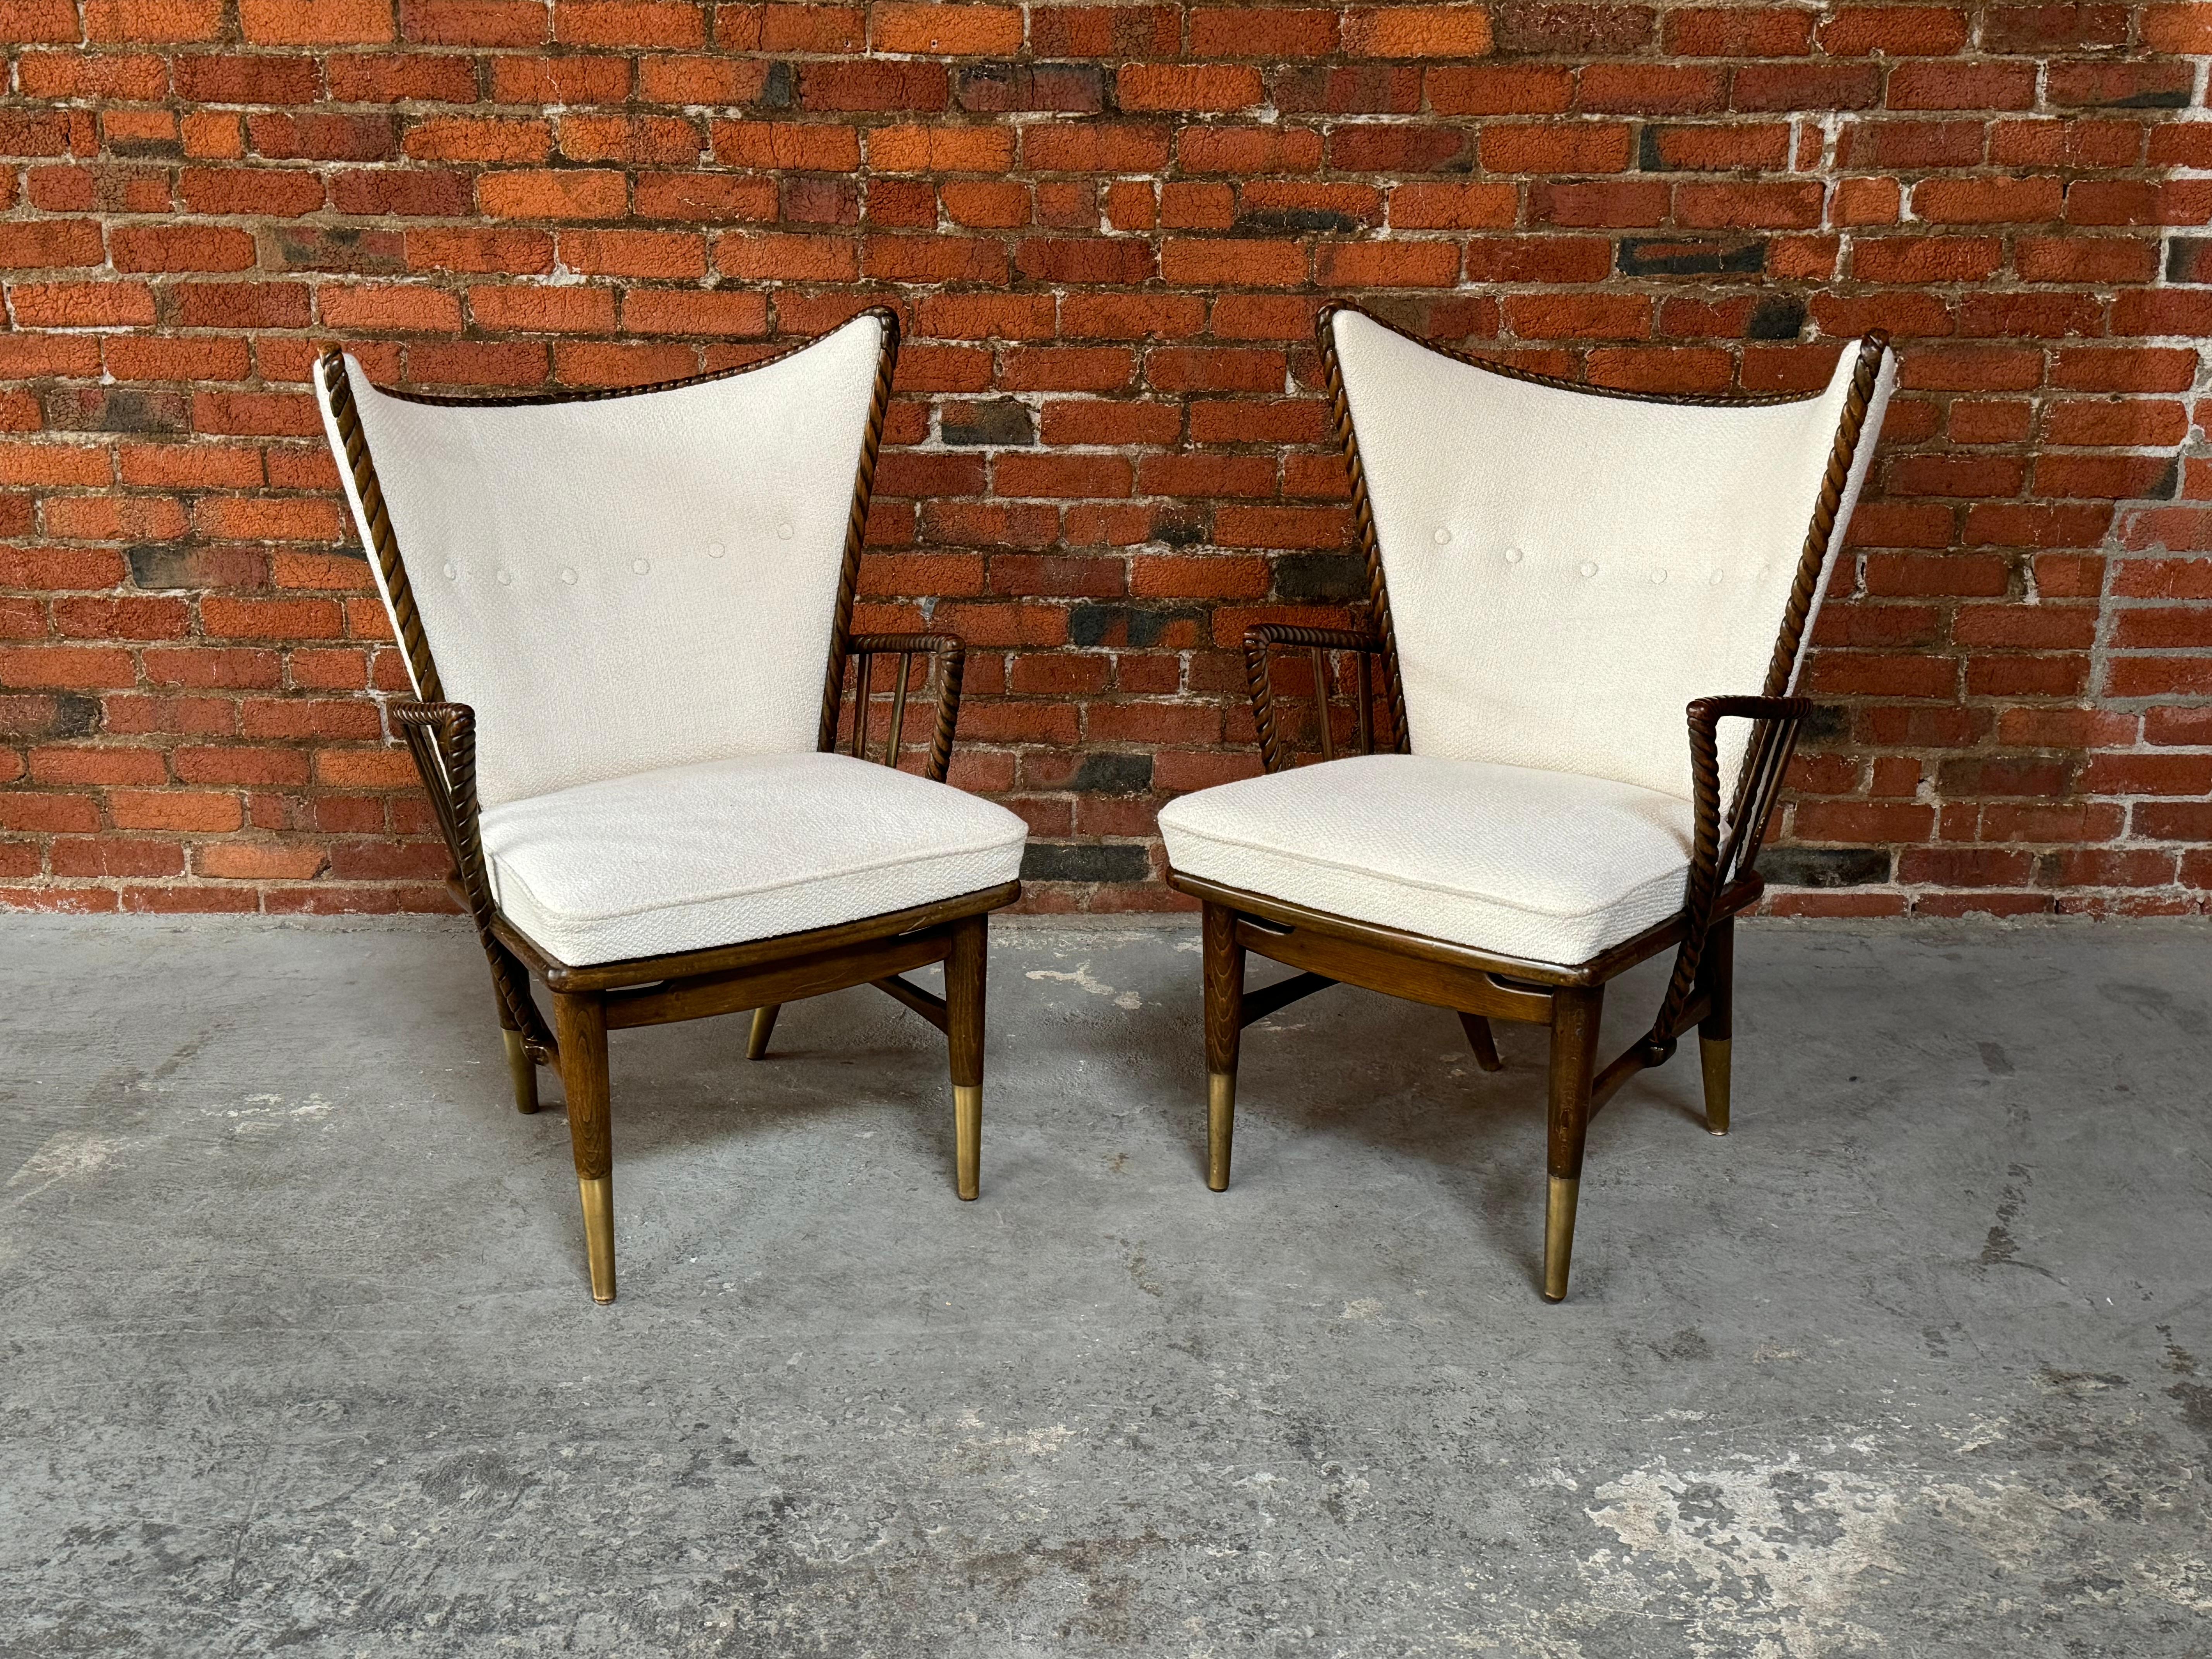 Dramatic winged armchairs feature intricately carved wood frames and brass boots. Maker unknown, recently imported from Europe and fully restored with a slightly nubby-textured ivory woven wool upholstery, with frames crafted out tropical hardwood.